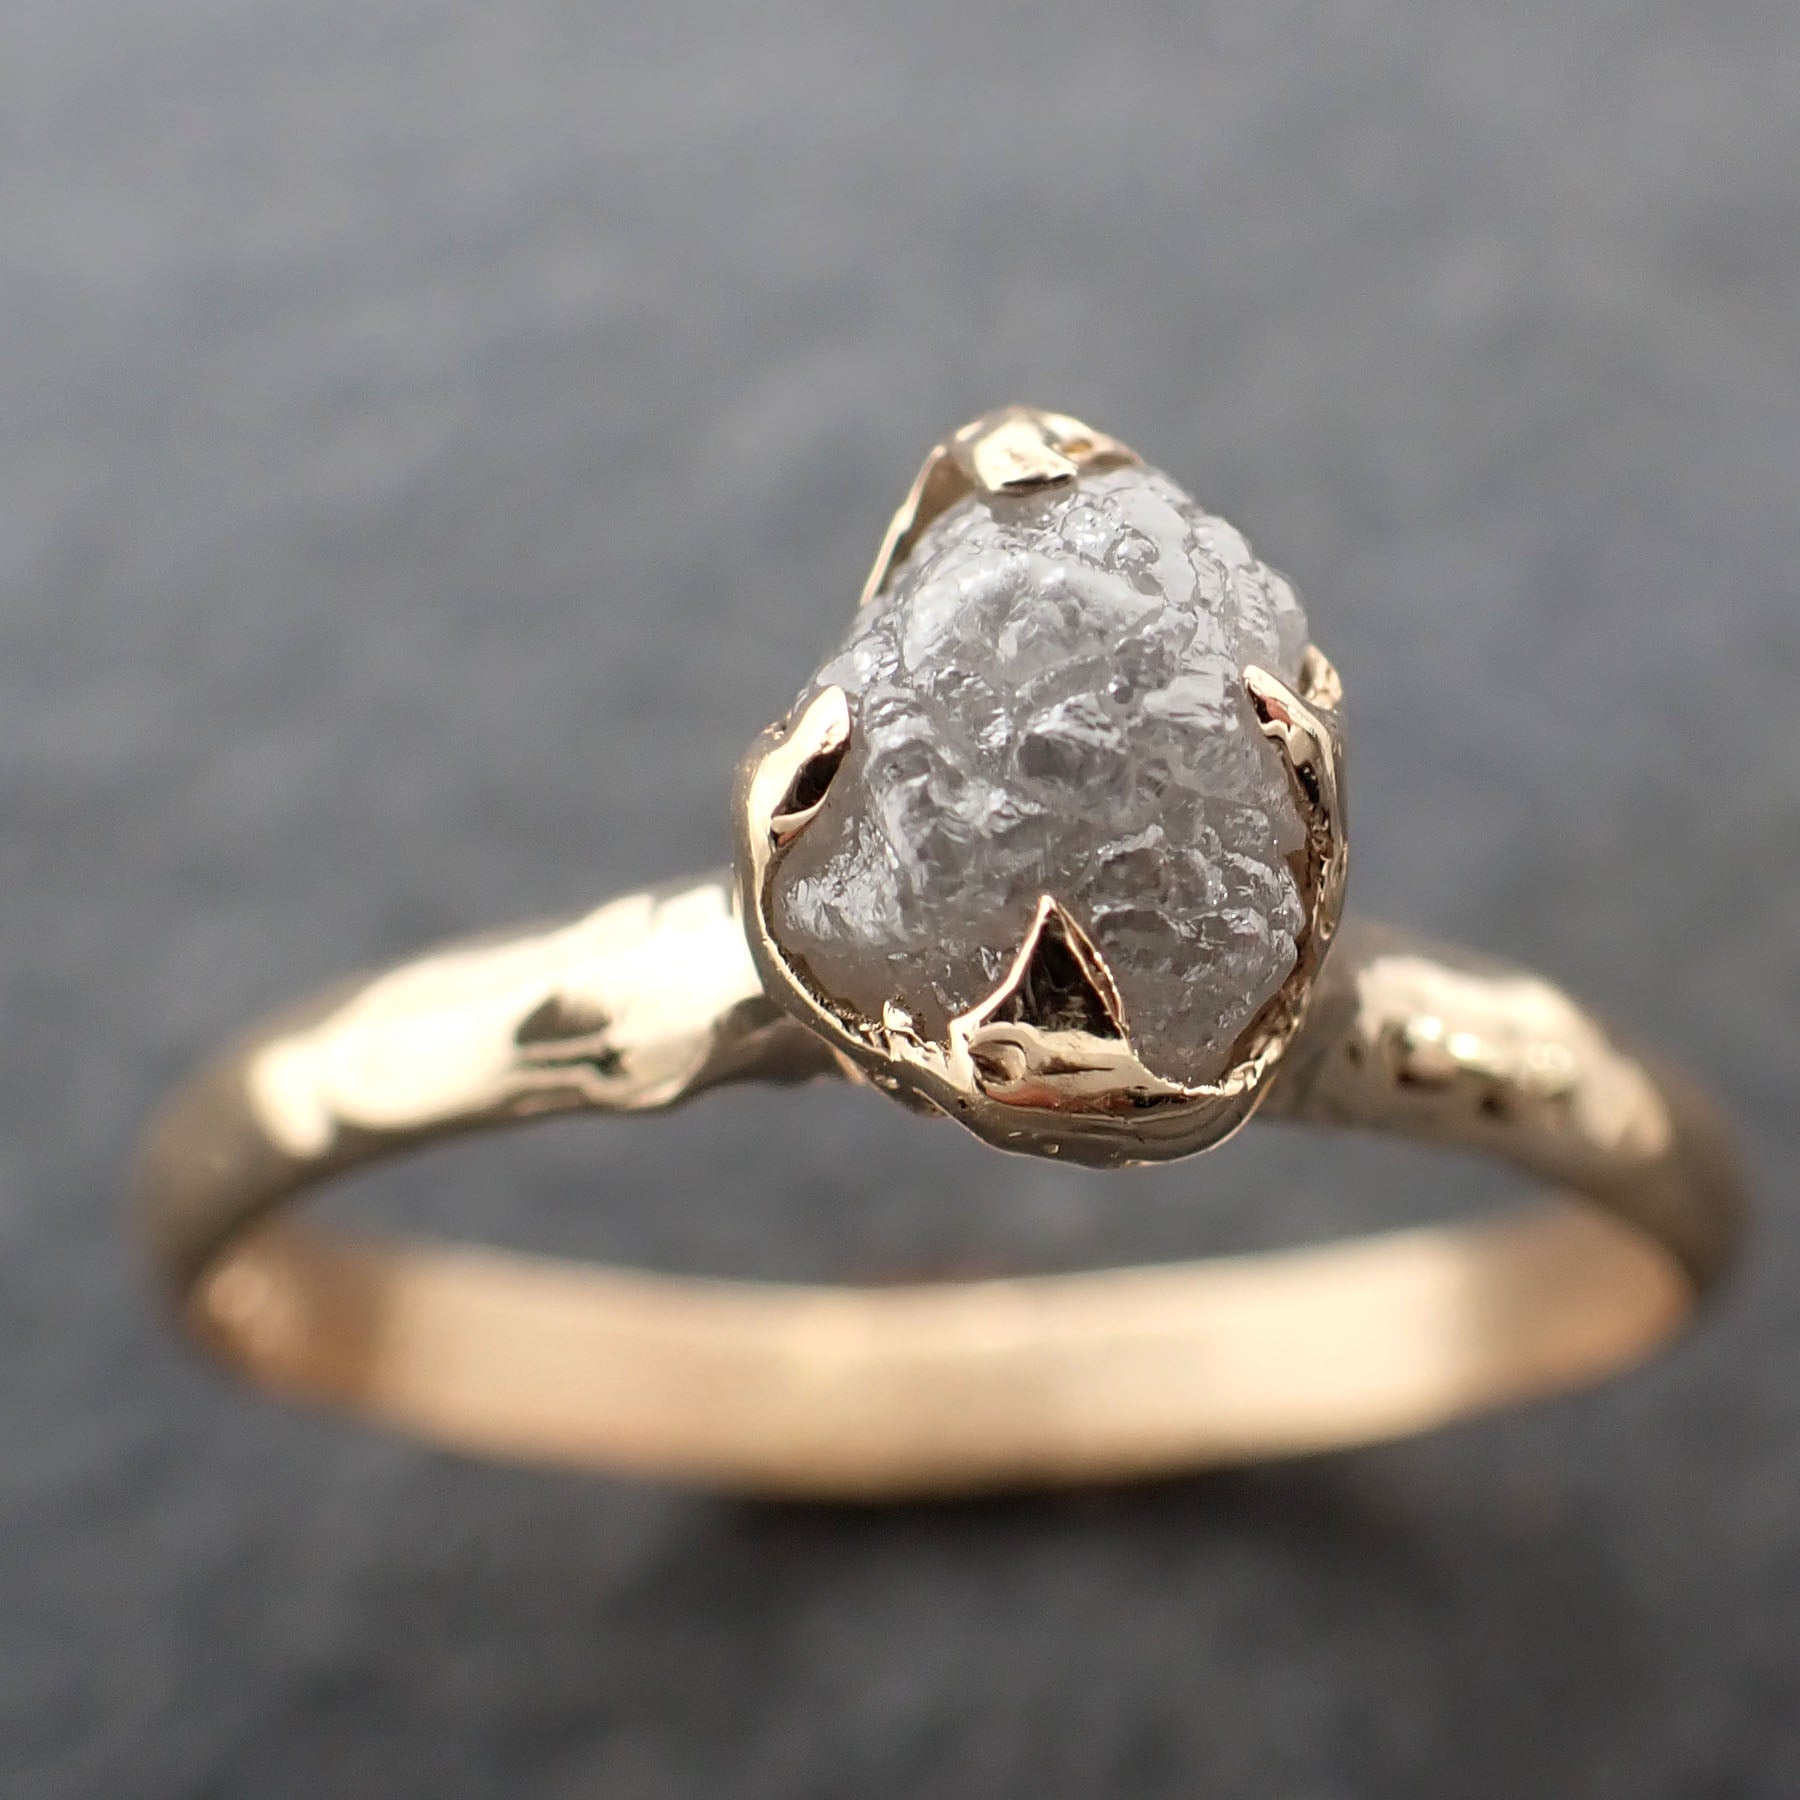 raw diamond engagement ring rough uncut diamond solitaire recycled 14k yellow gold conflict free diamond wedding promise 2403 Alternative Engagement